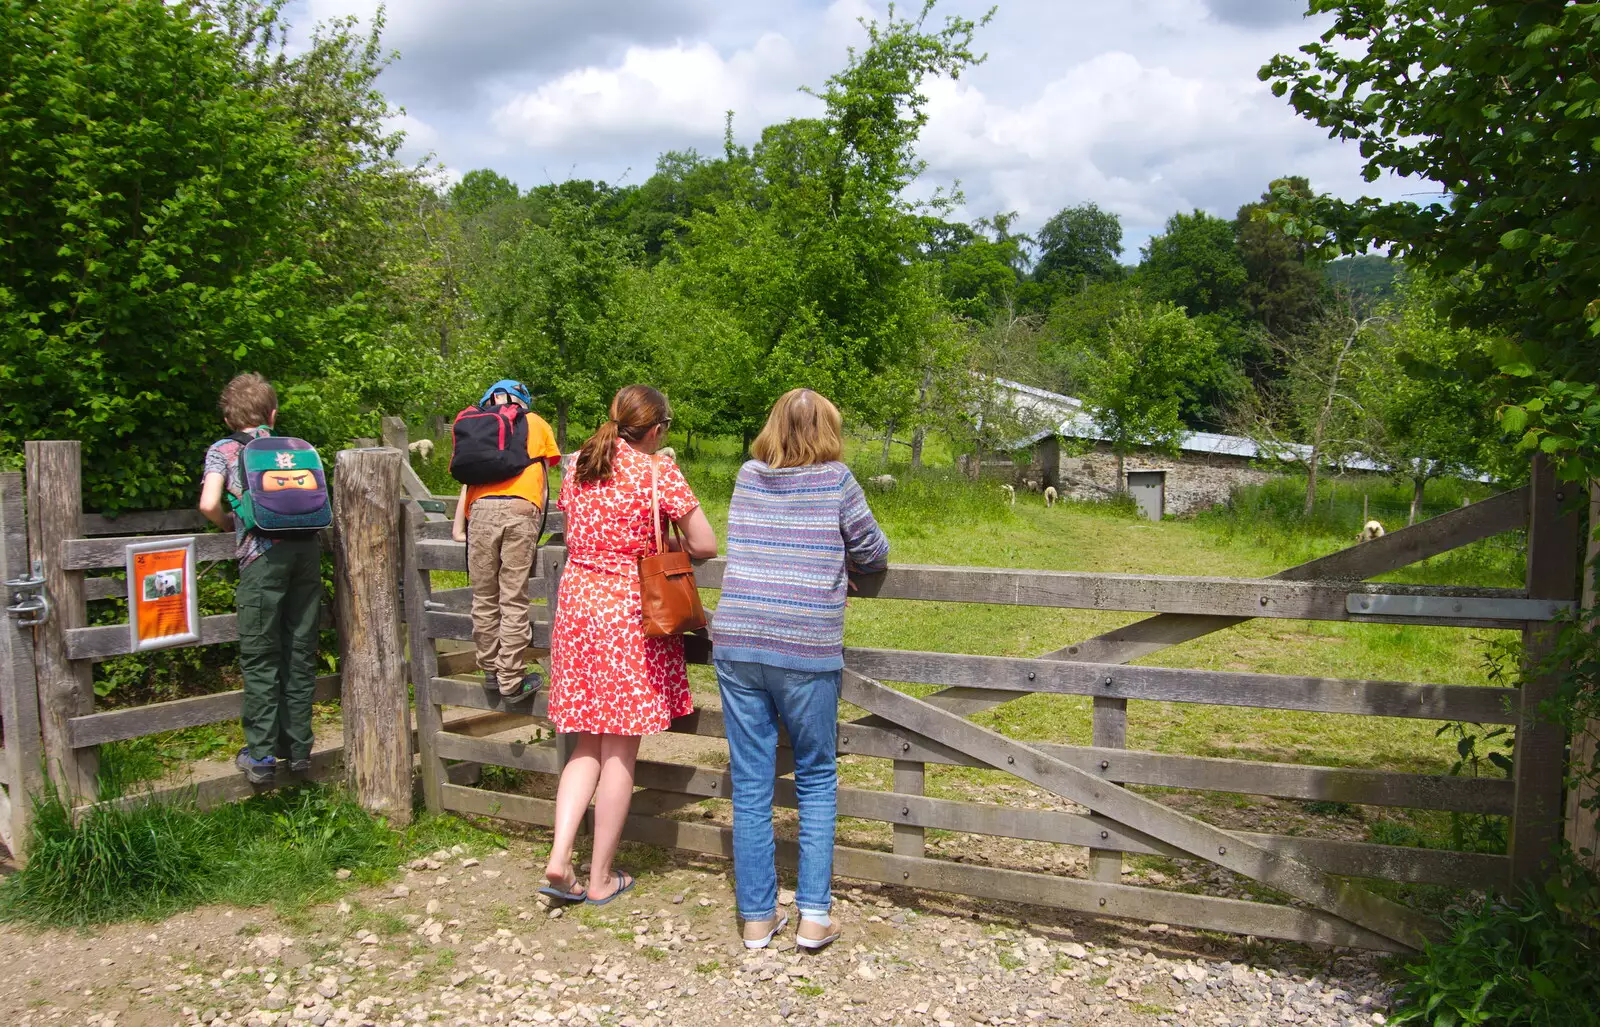 The gang hang on a gate and watch the sheep, from Chagford Lido and a Trip to Parke, Bovey Tracey, Devon - 25th May 2019